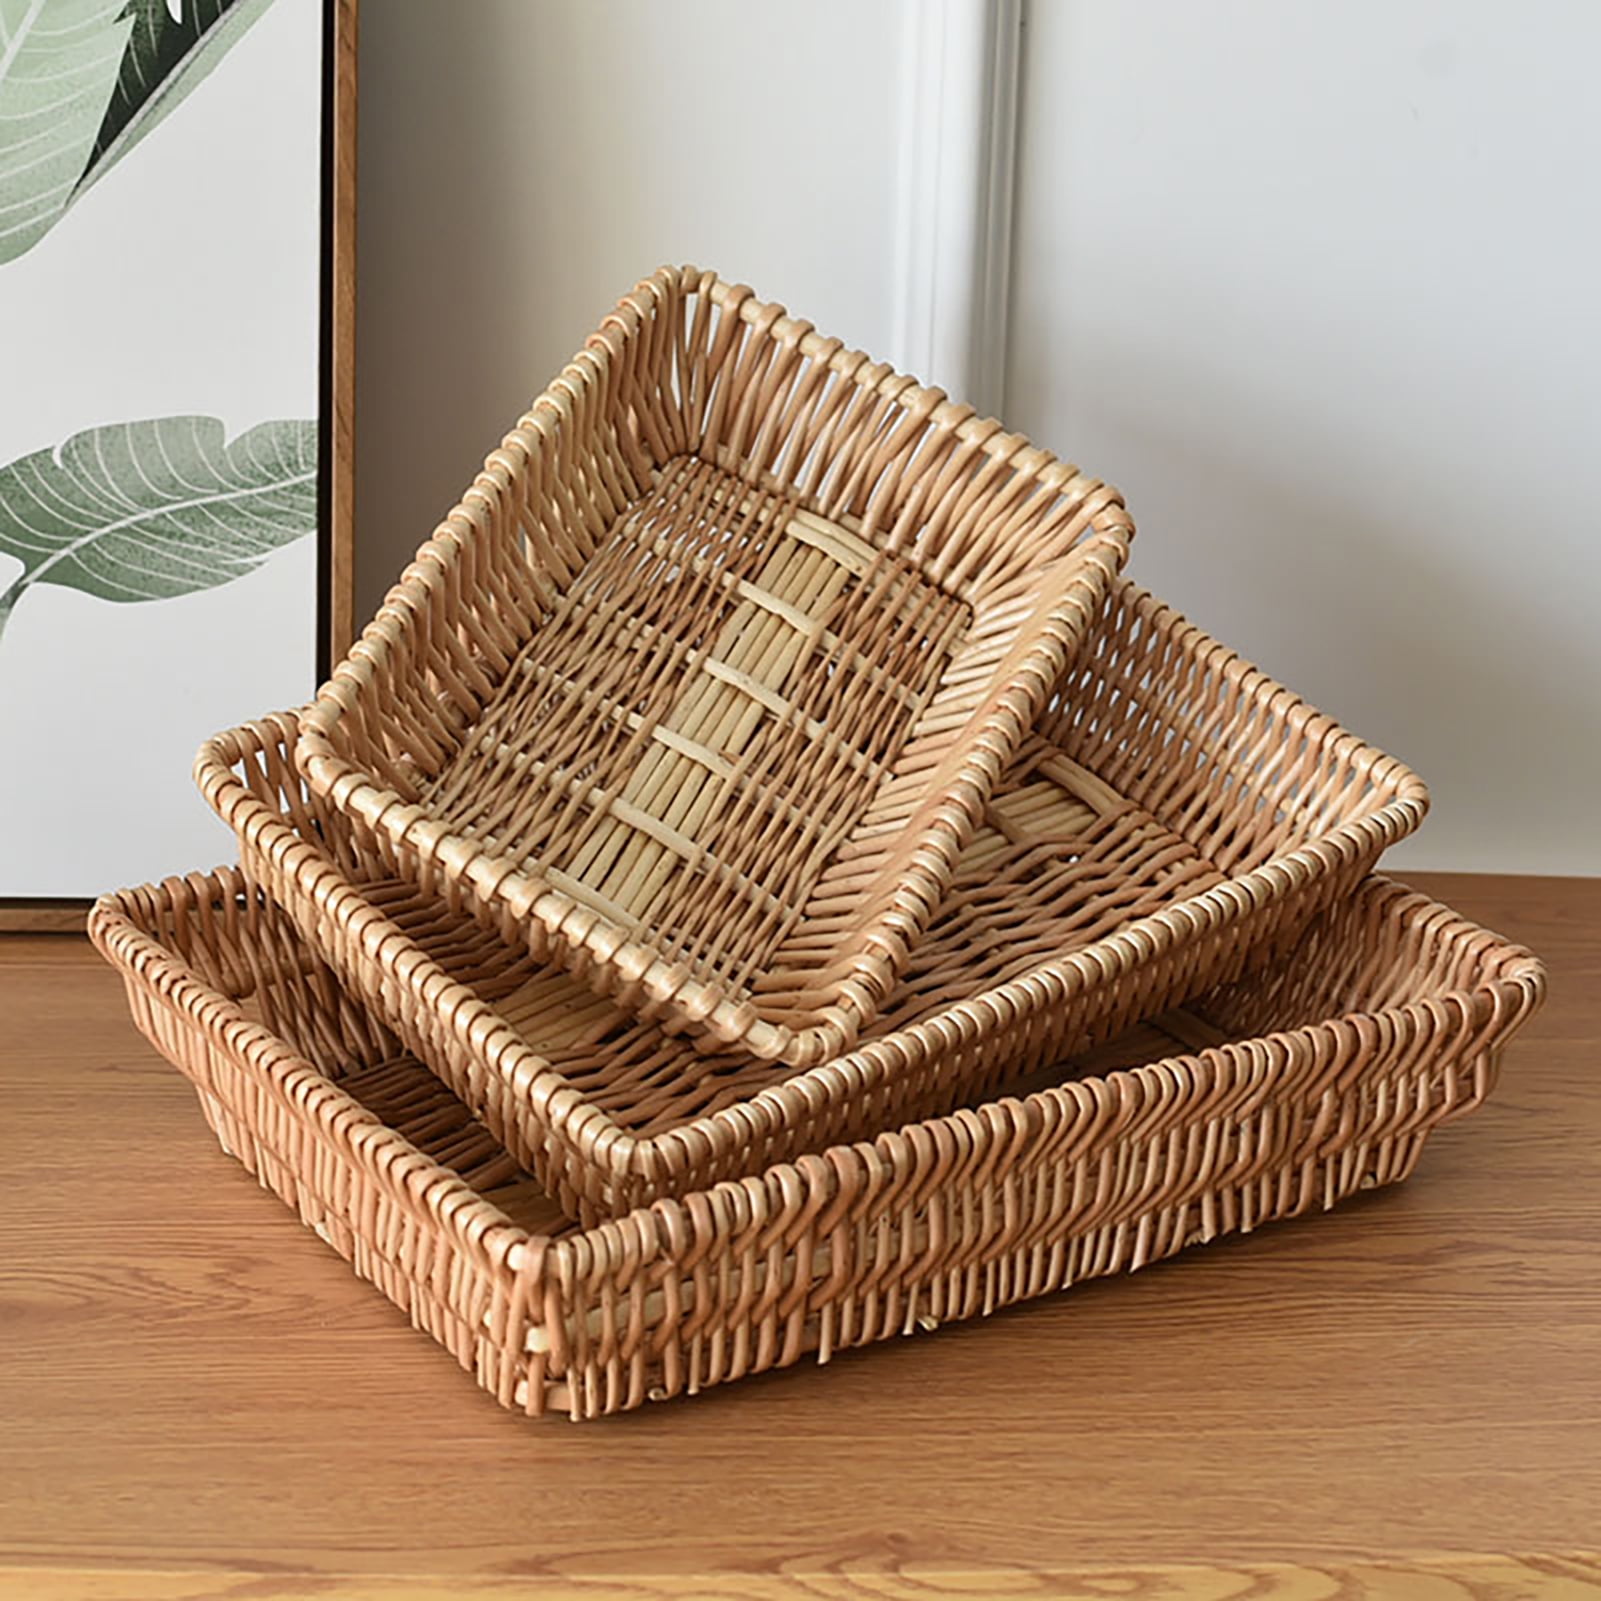 pot Hand-Woven Rattan Rectangular Service Basket with Handles Size : L Used for Book and Sundries Storage Box Desktop Storage Basket